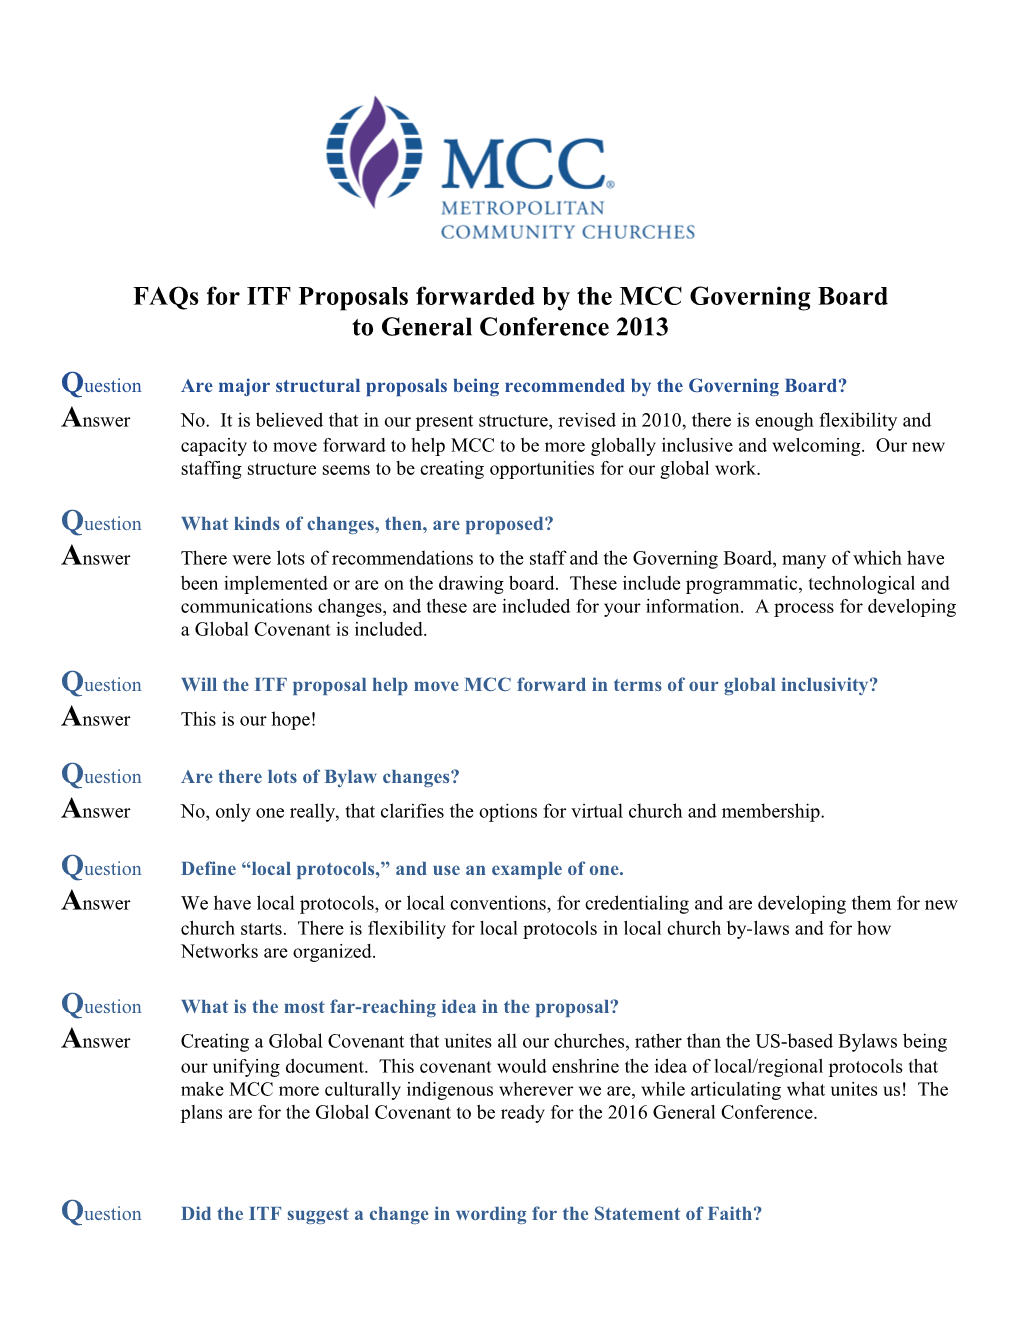 9C Faqs for ITF Proposals Forwarded by the MCC Governing Board